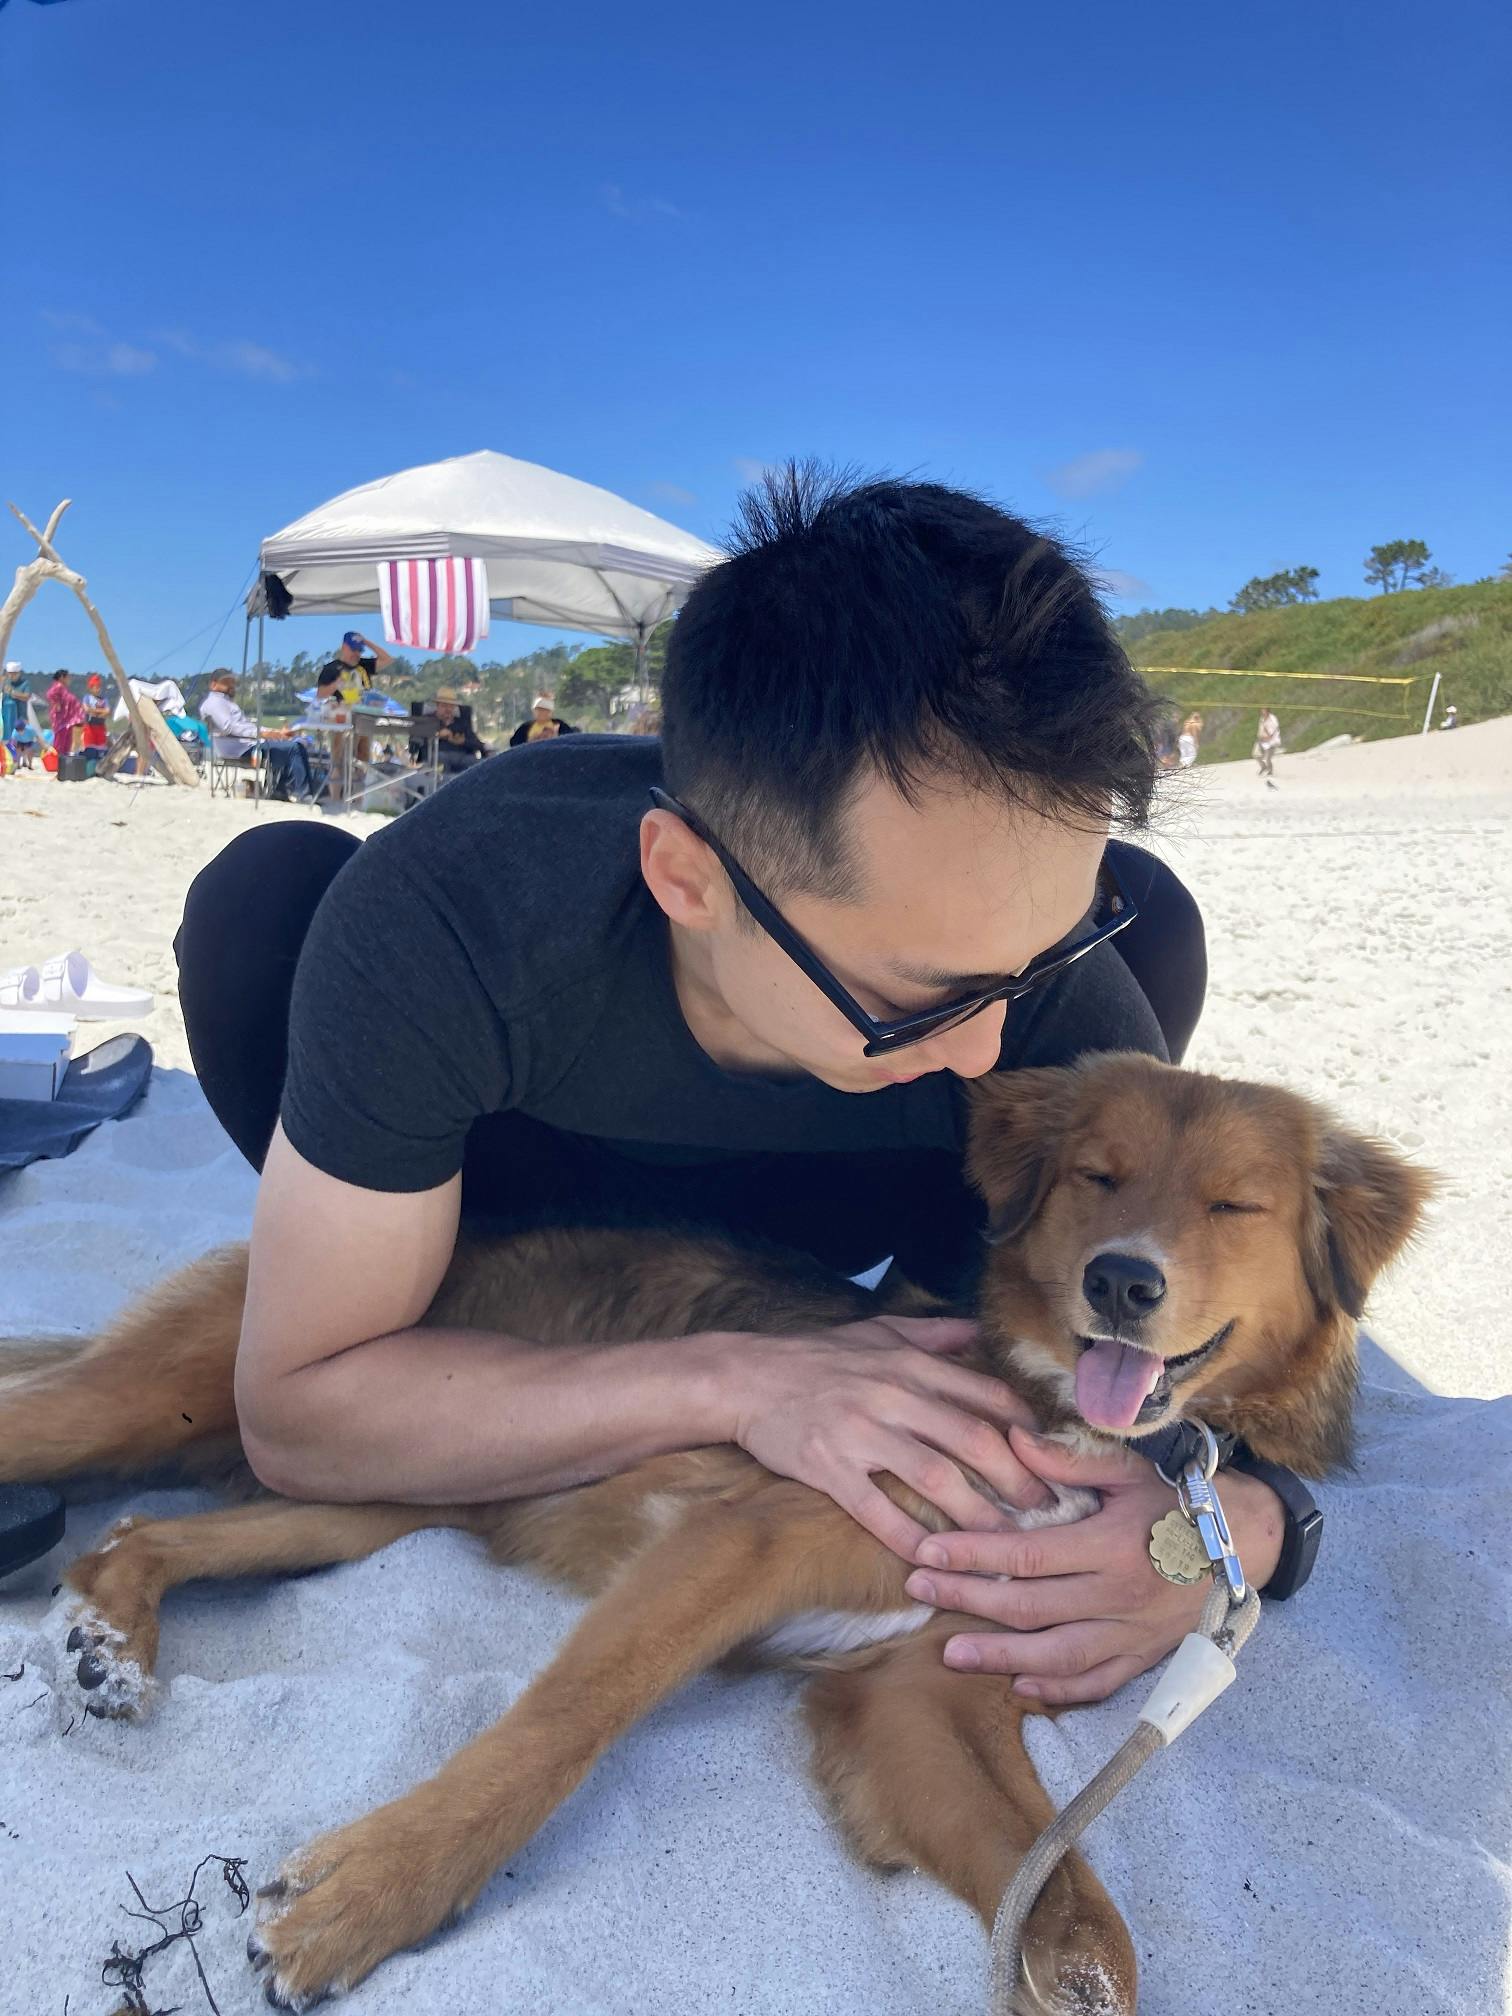 Alex on a beach with his dog Zorro. He's squatting down while petting him